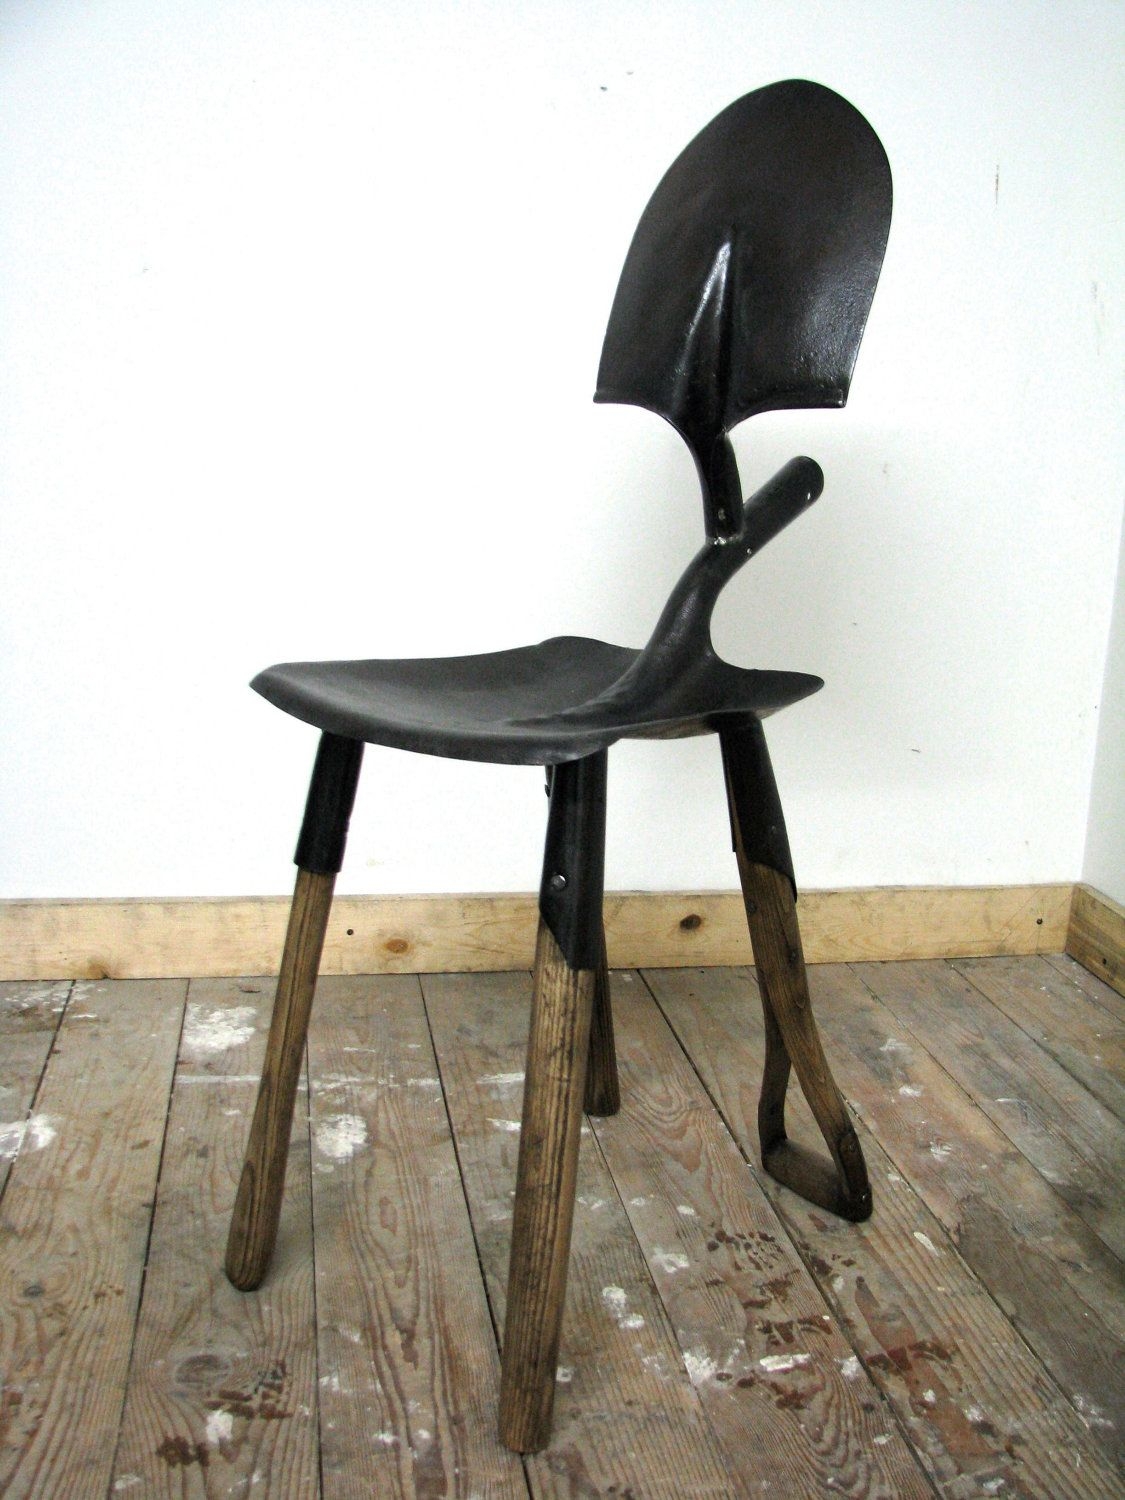 Recycled shovel chair